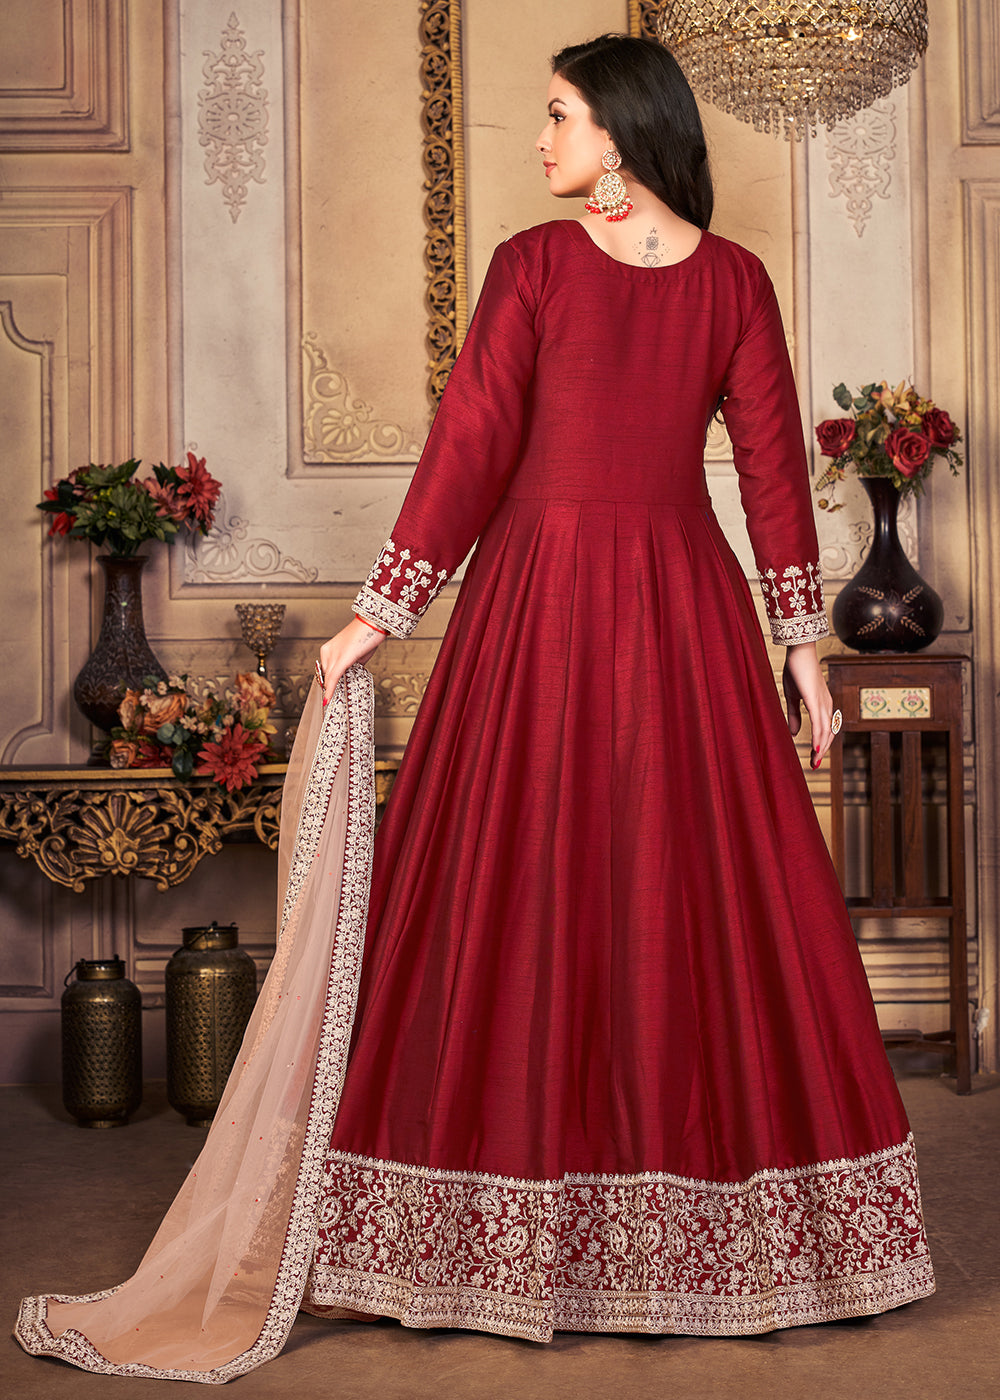 Buy Now Festive Stunning Red Embroidered Silk Anarkali Suit Online in Canada at Empress Clothing.